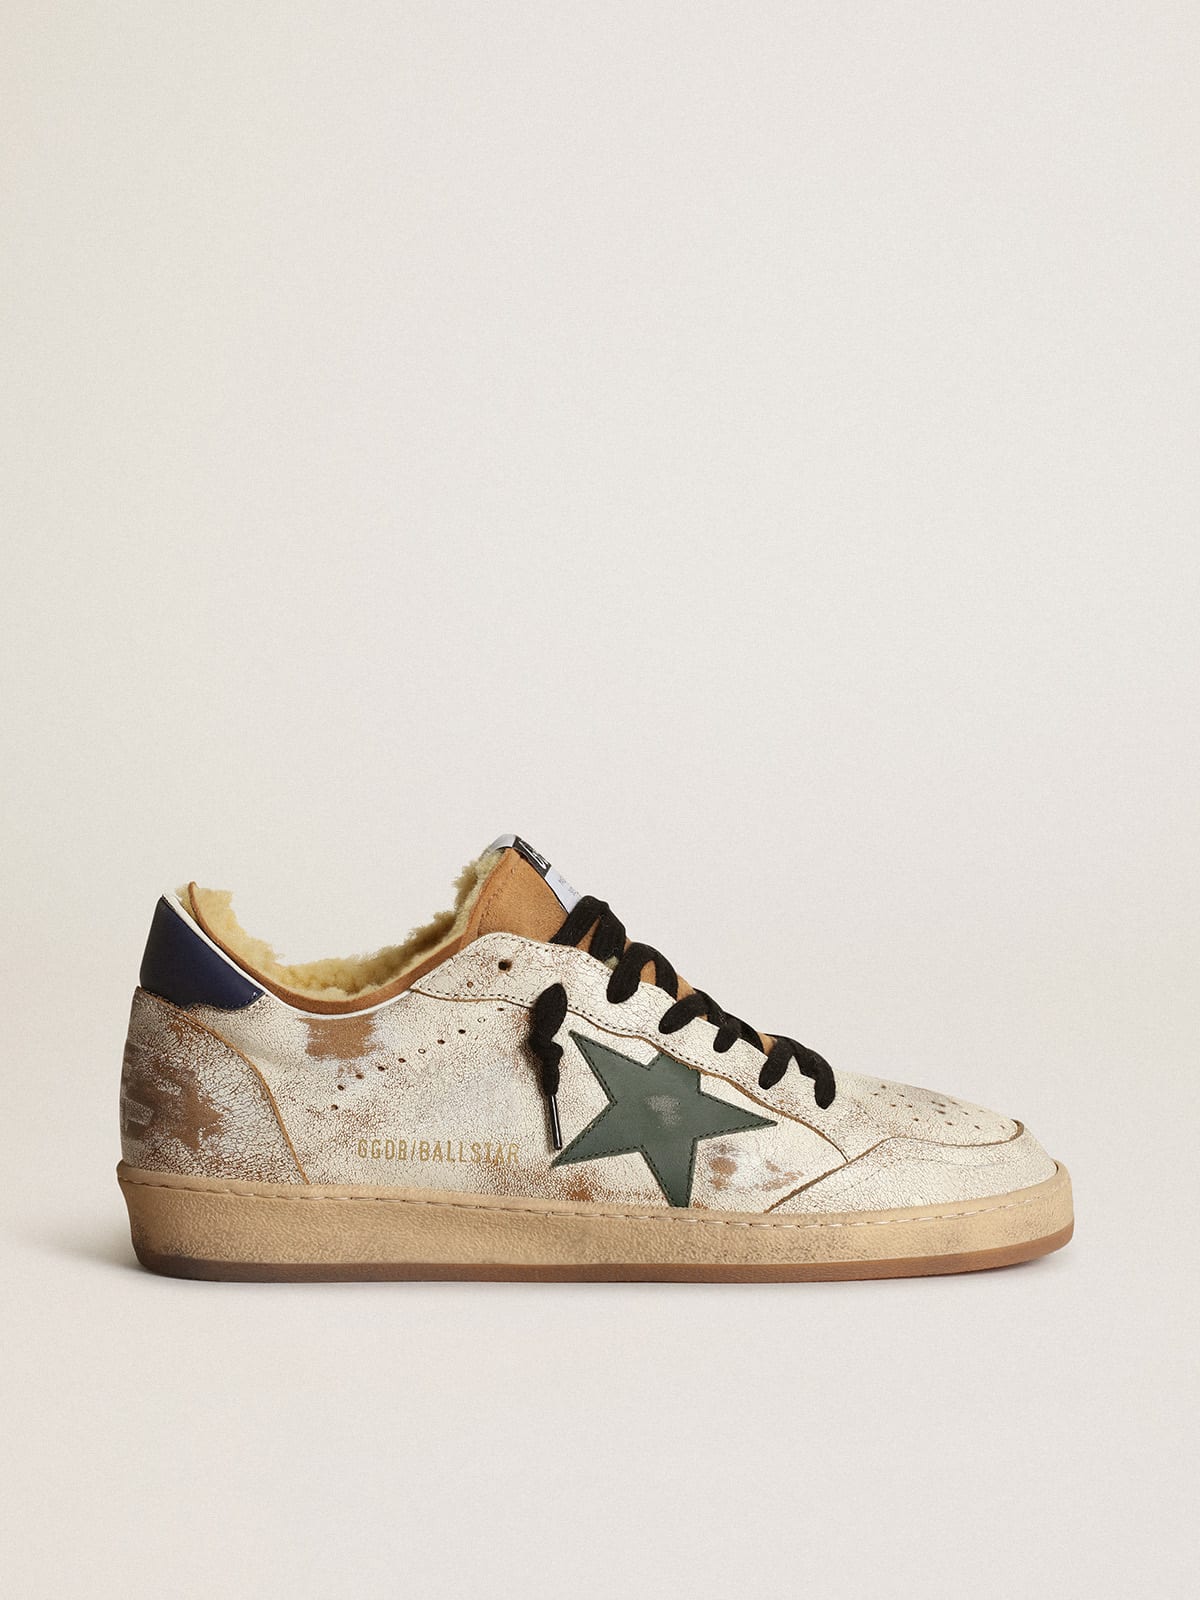 Golden Goose - Ball Star sneakers in glossy white leather with dark green leather star and shearling lining in 